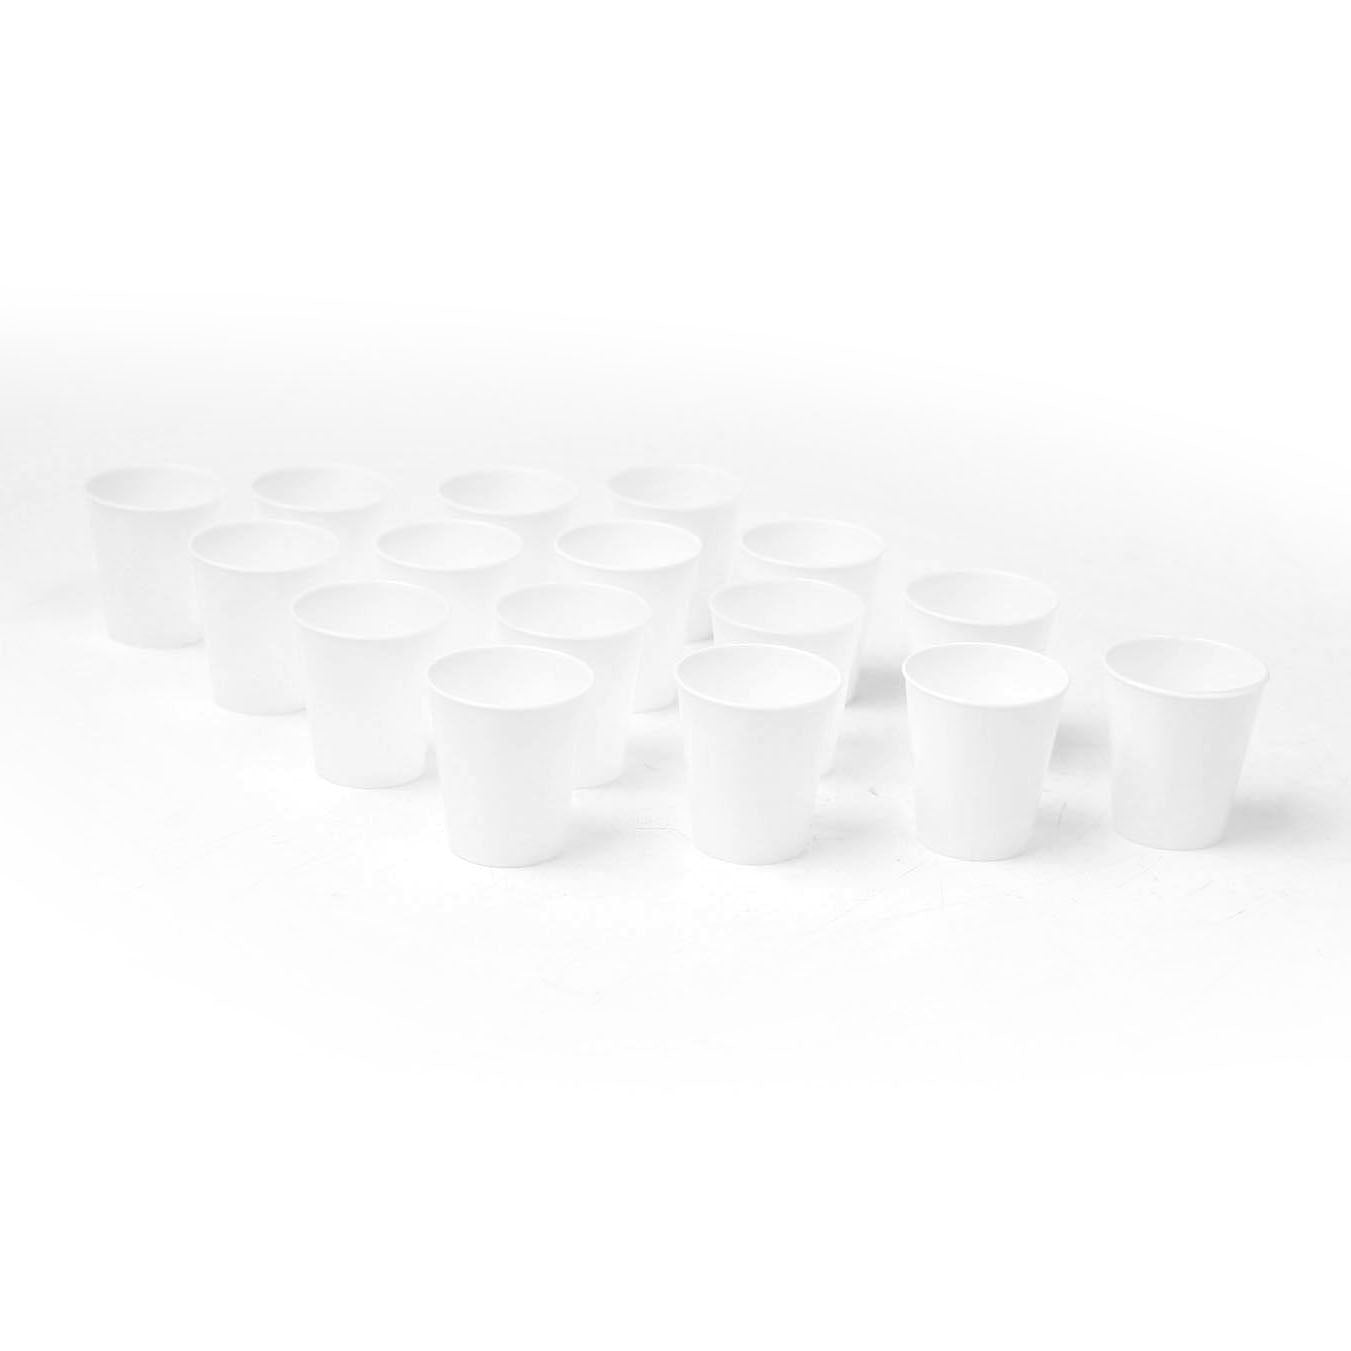 Pack of 500 x White Shot Glasses Biodegradable Material Plastic 3cl 30ml Stackable Liquor, Spirits, Food Sampling, Parties, Jelly Shots